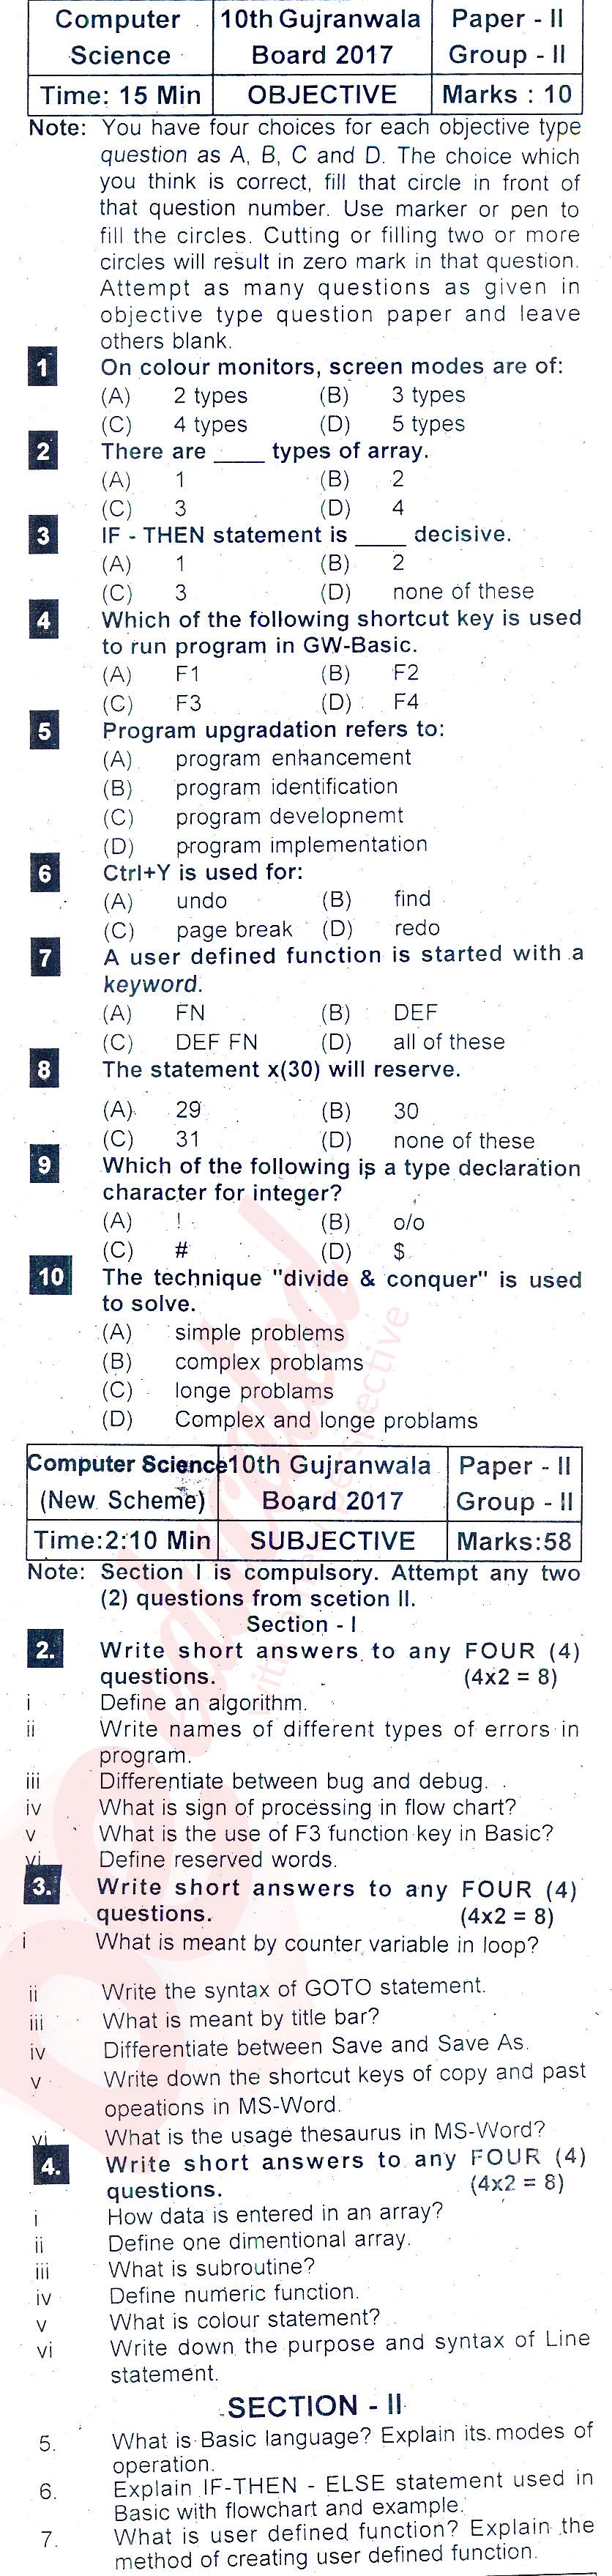 Computer Science 10th class Past Paper Group 2 BISE Gujranwala 2017